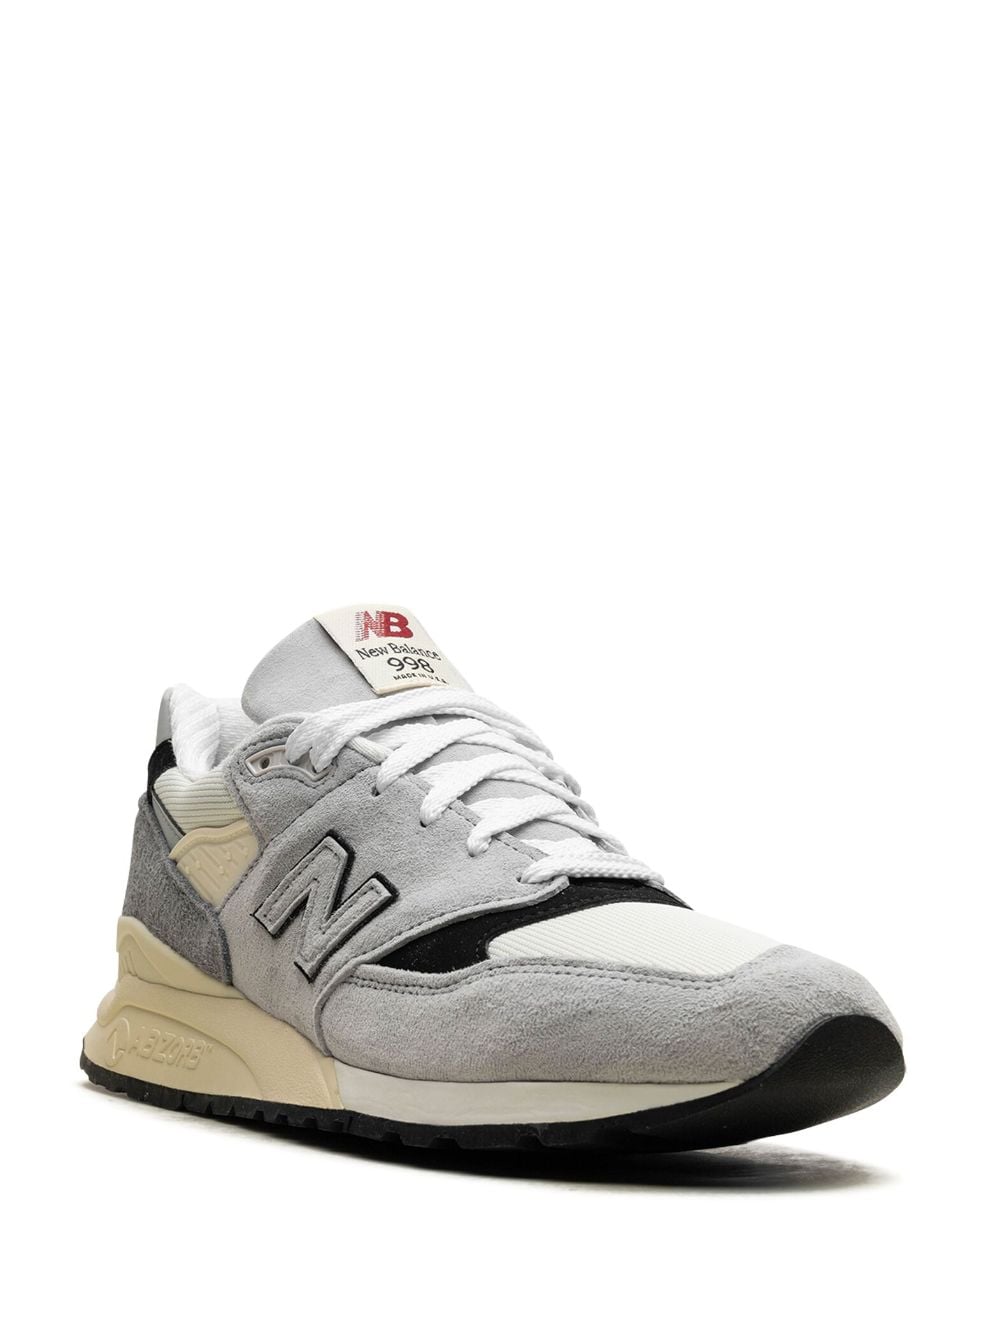 Shop New Balance 998 Made In Usa "grey" Sneakers